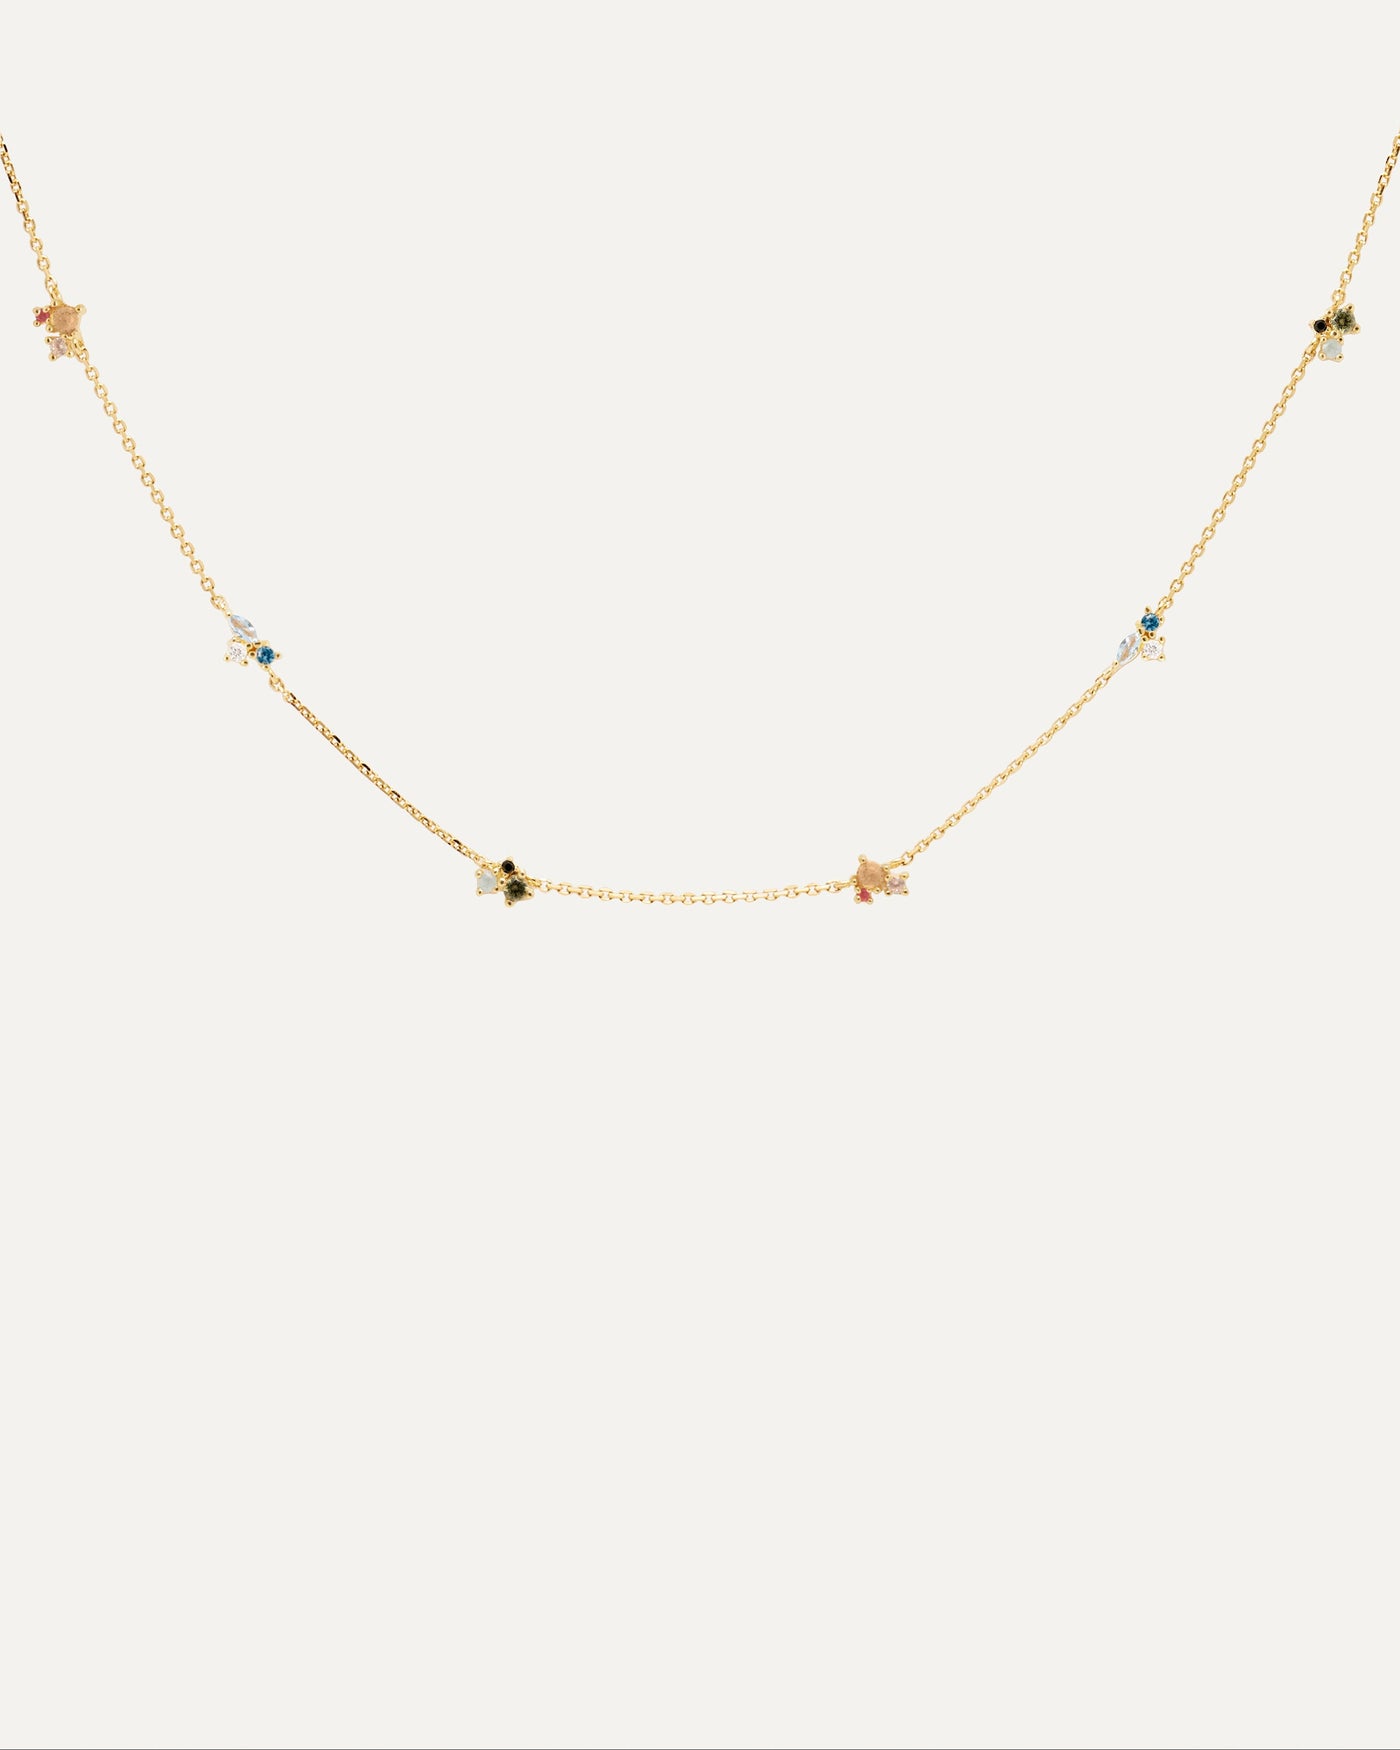 2023 Selection | La Palette Necklace. Colorful zirconia stones set in multiple combinations on a 18k gold plated silver chain. Get the latest arrival from PDPAOLA. Place your order safely and get this Best Seller. Free Shipping.